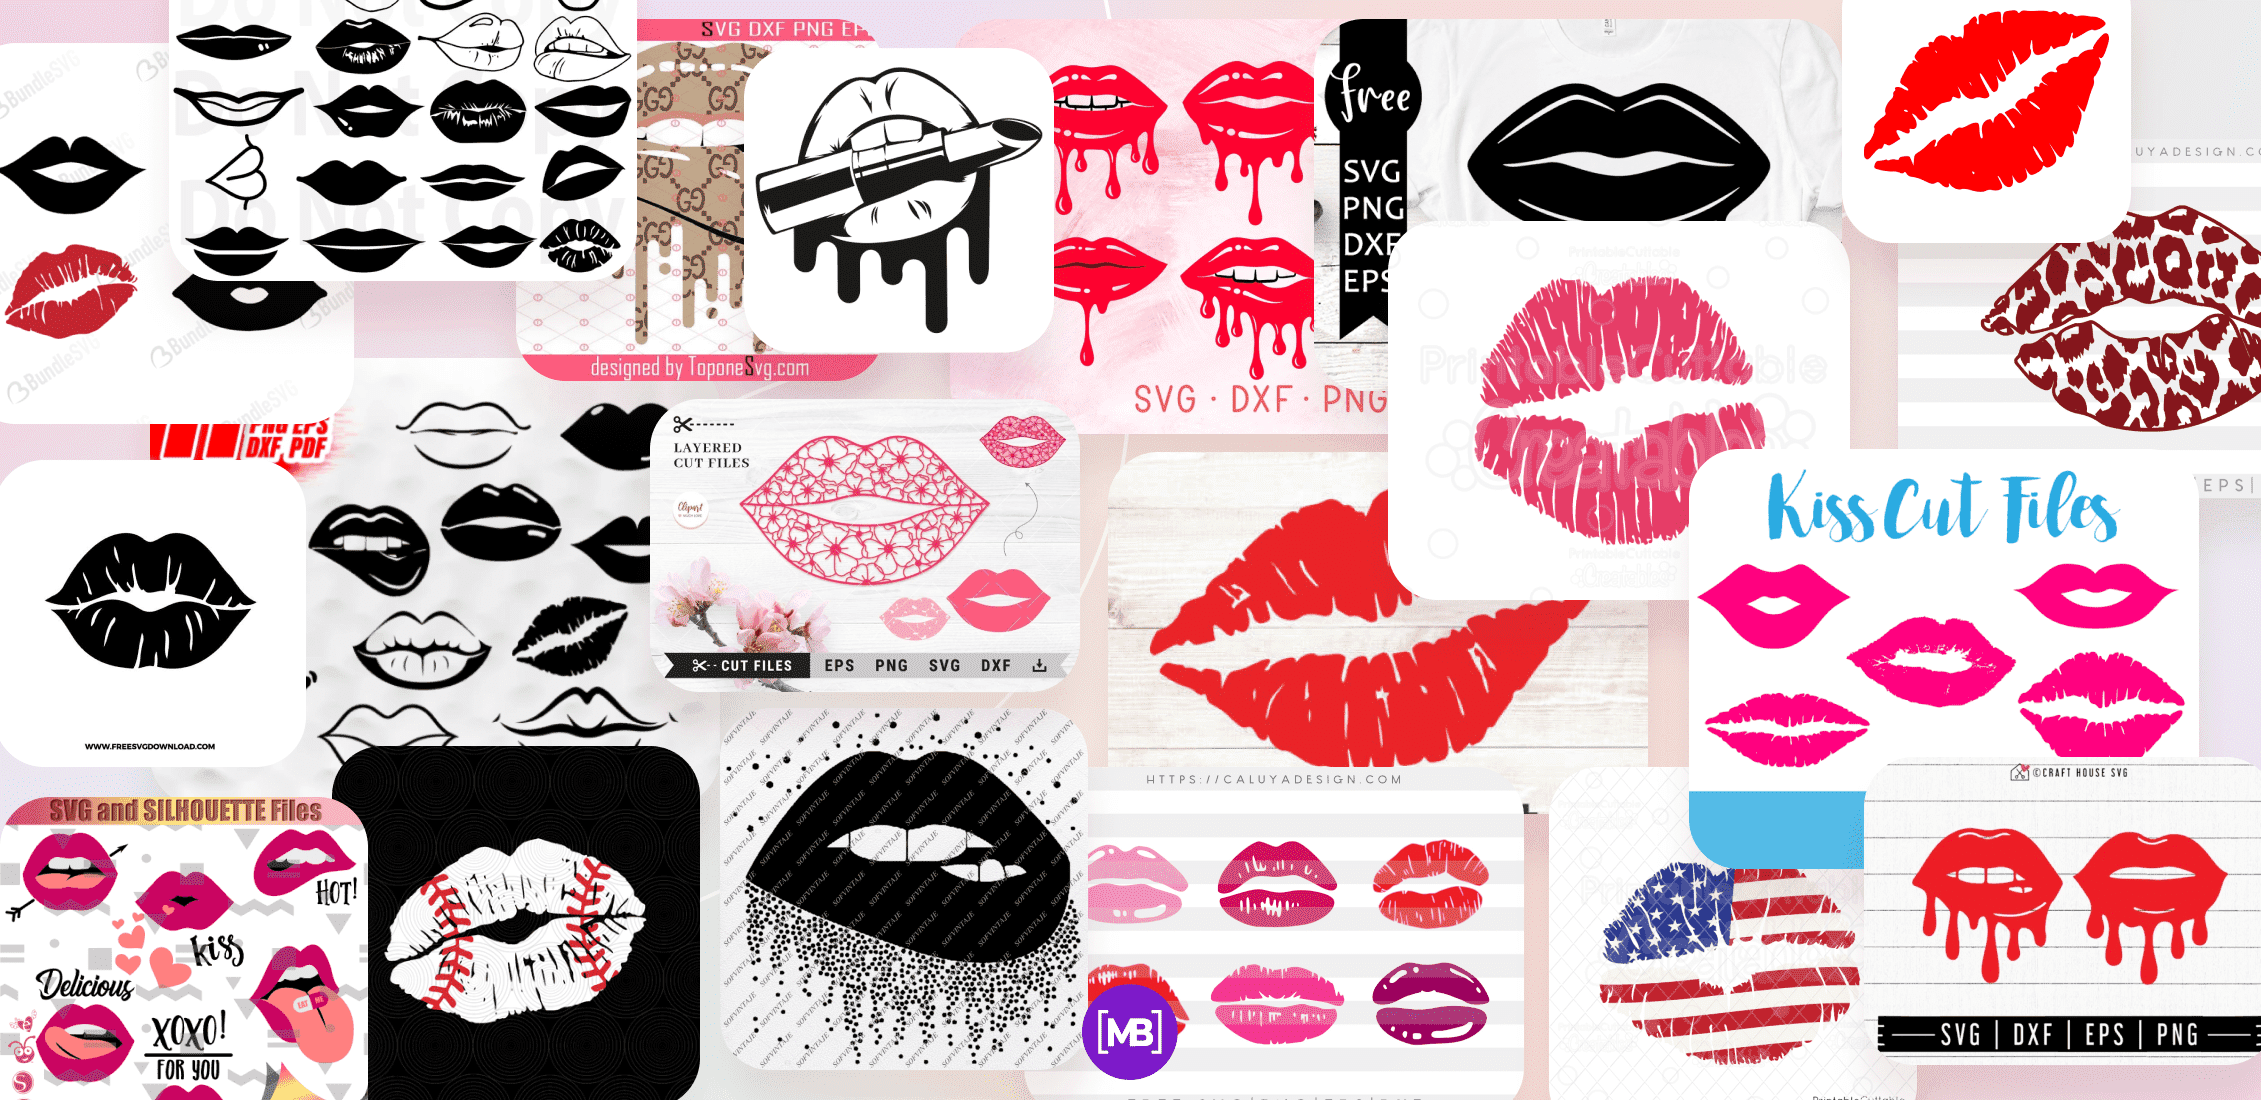 Lips SVG Images Example.